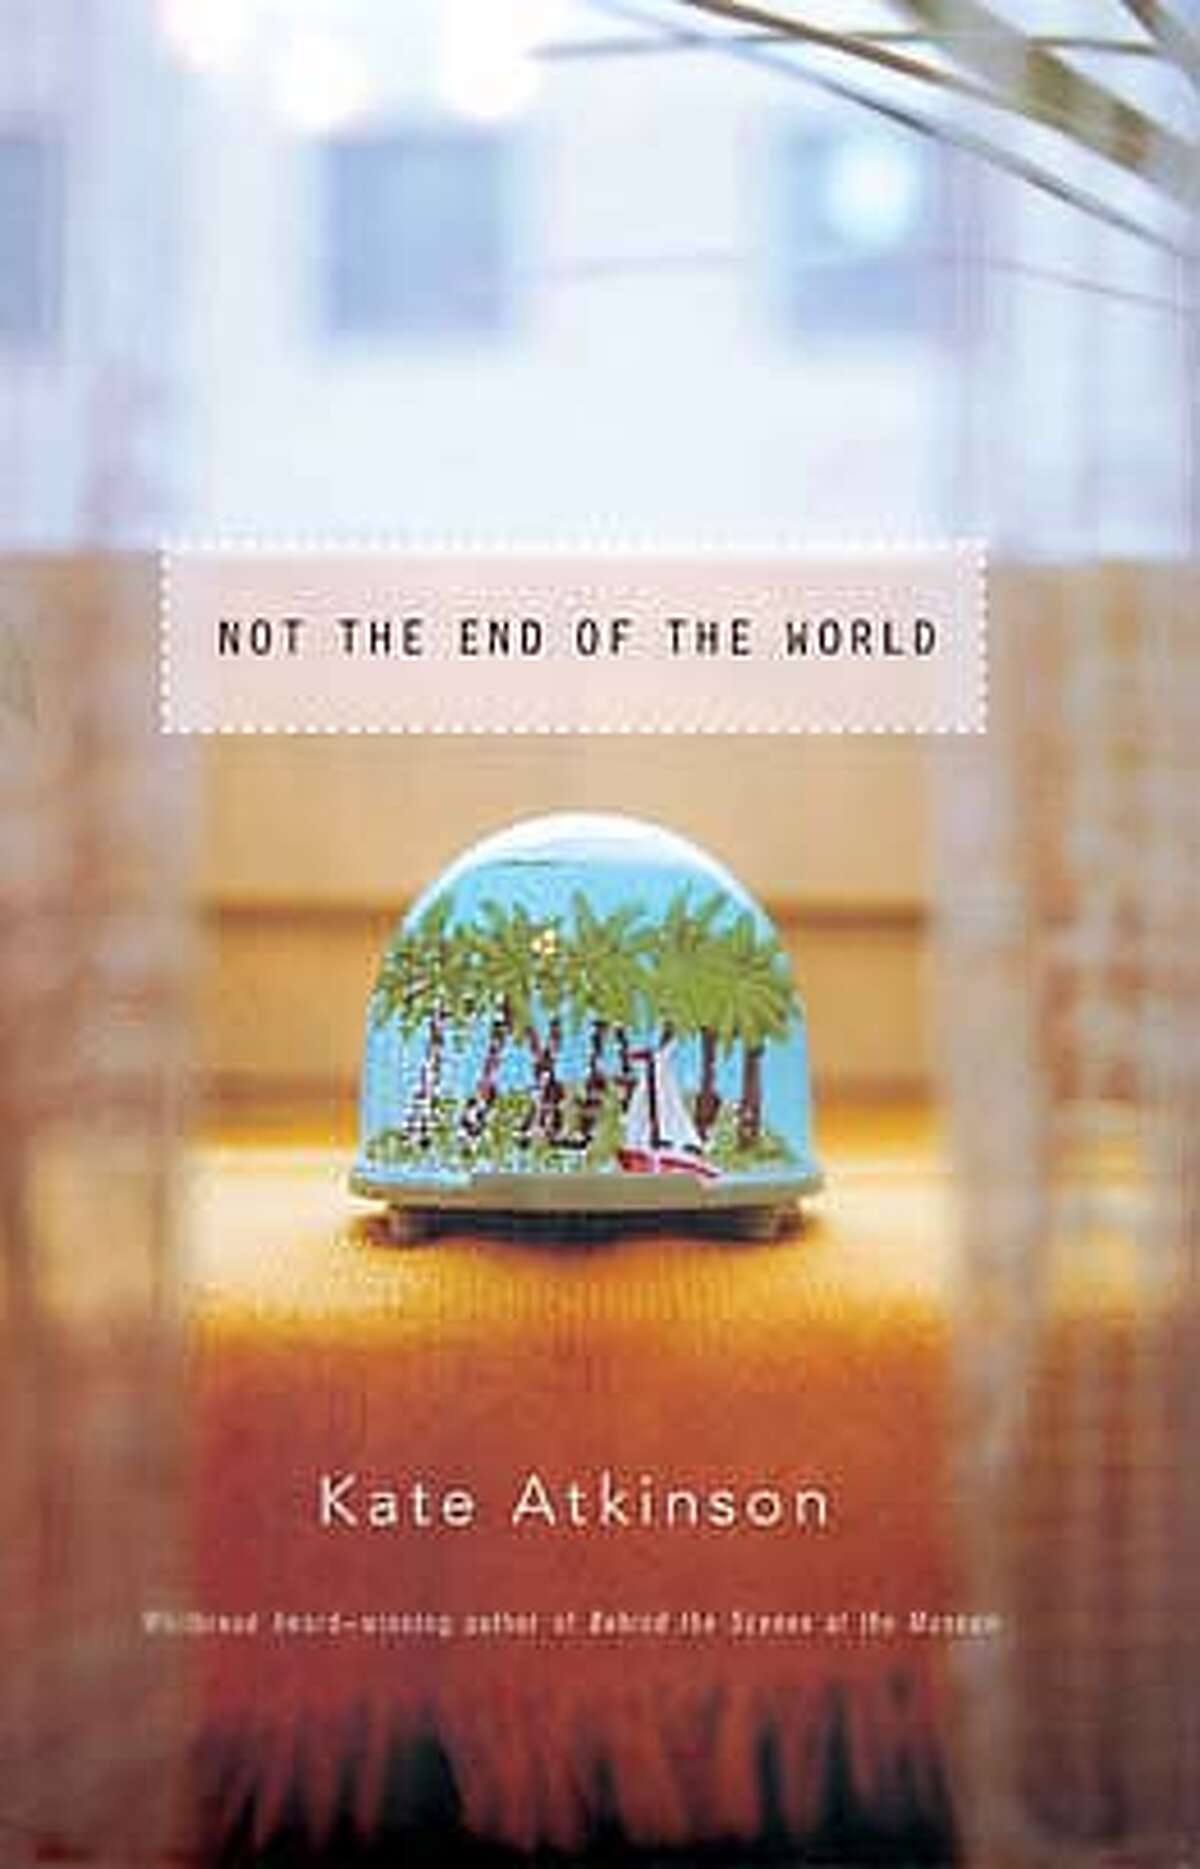 "Not the End of the World" by Kate Atkinson